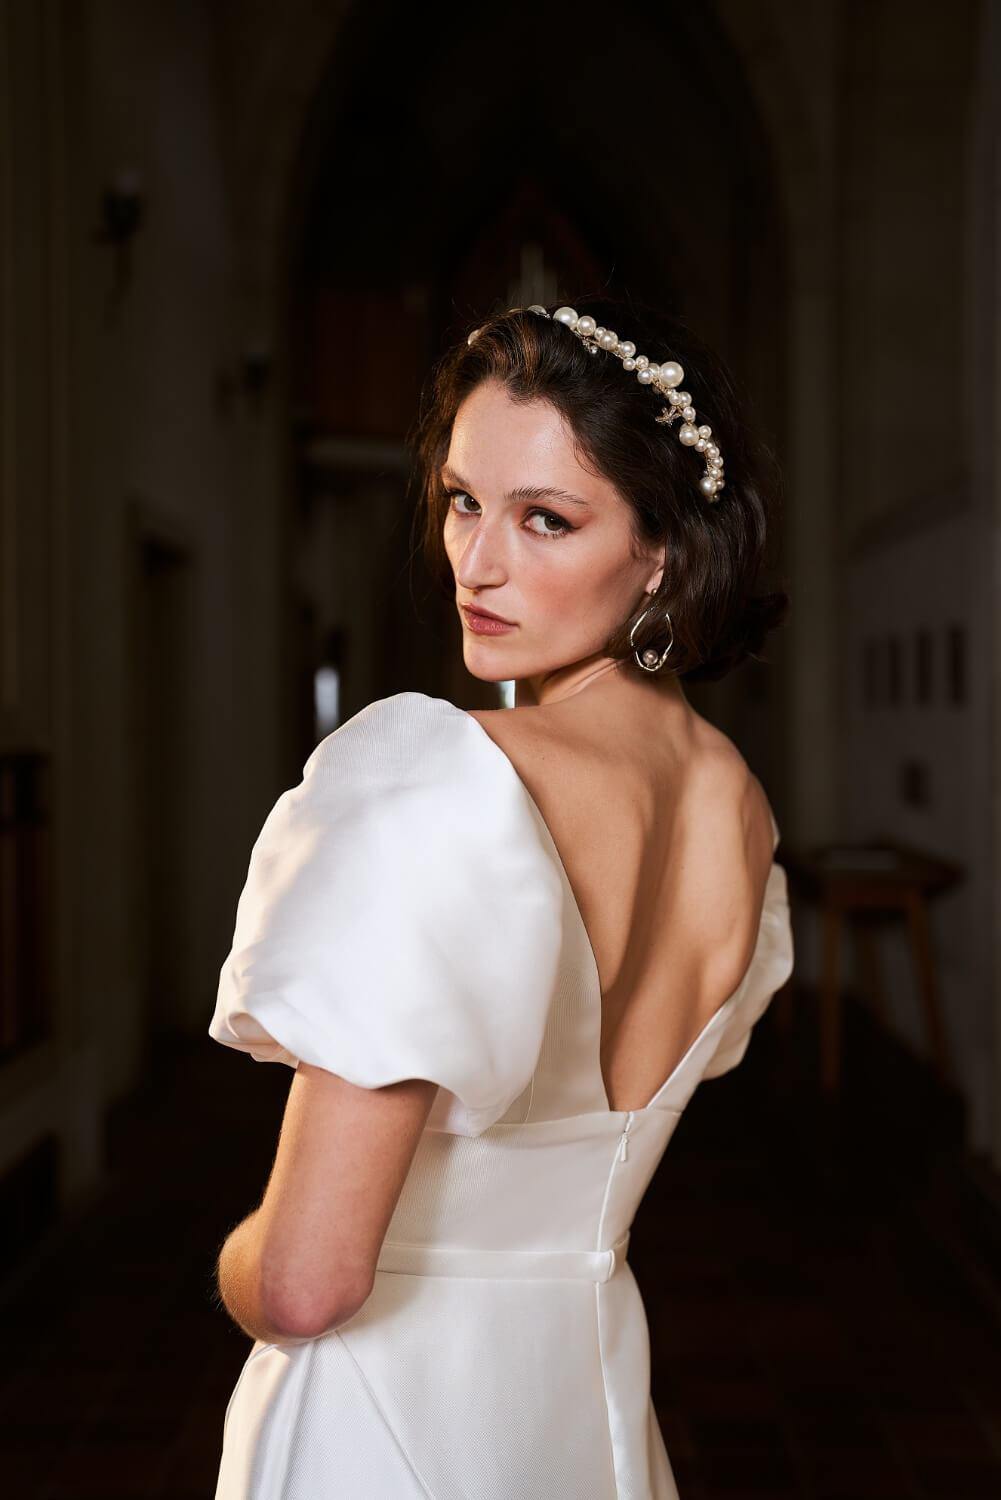 Model wearing Sydney wedding dress with statement sleeves from the Royal collection